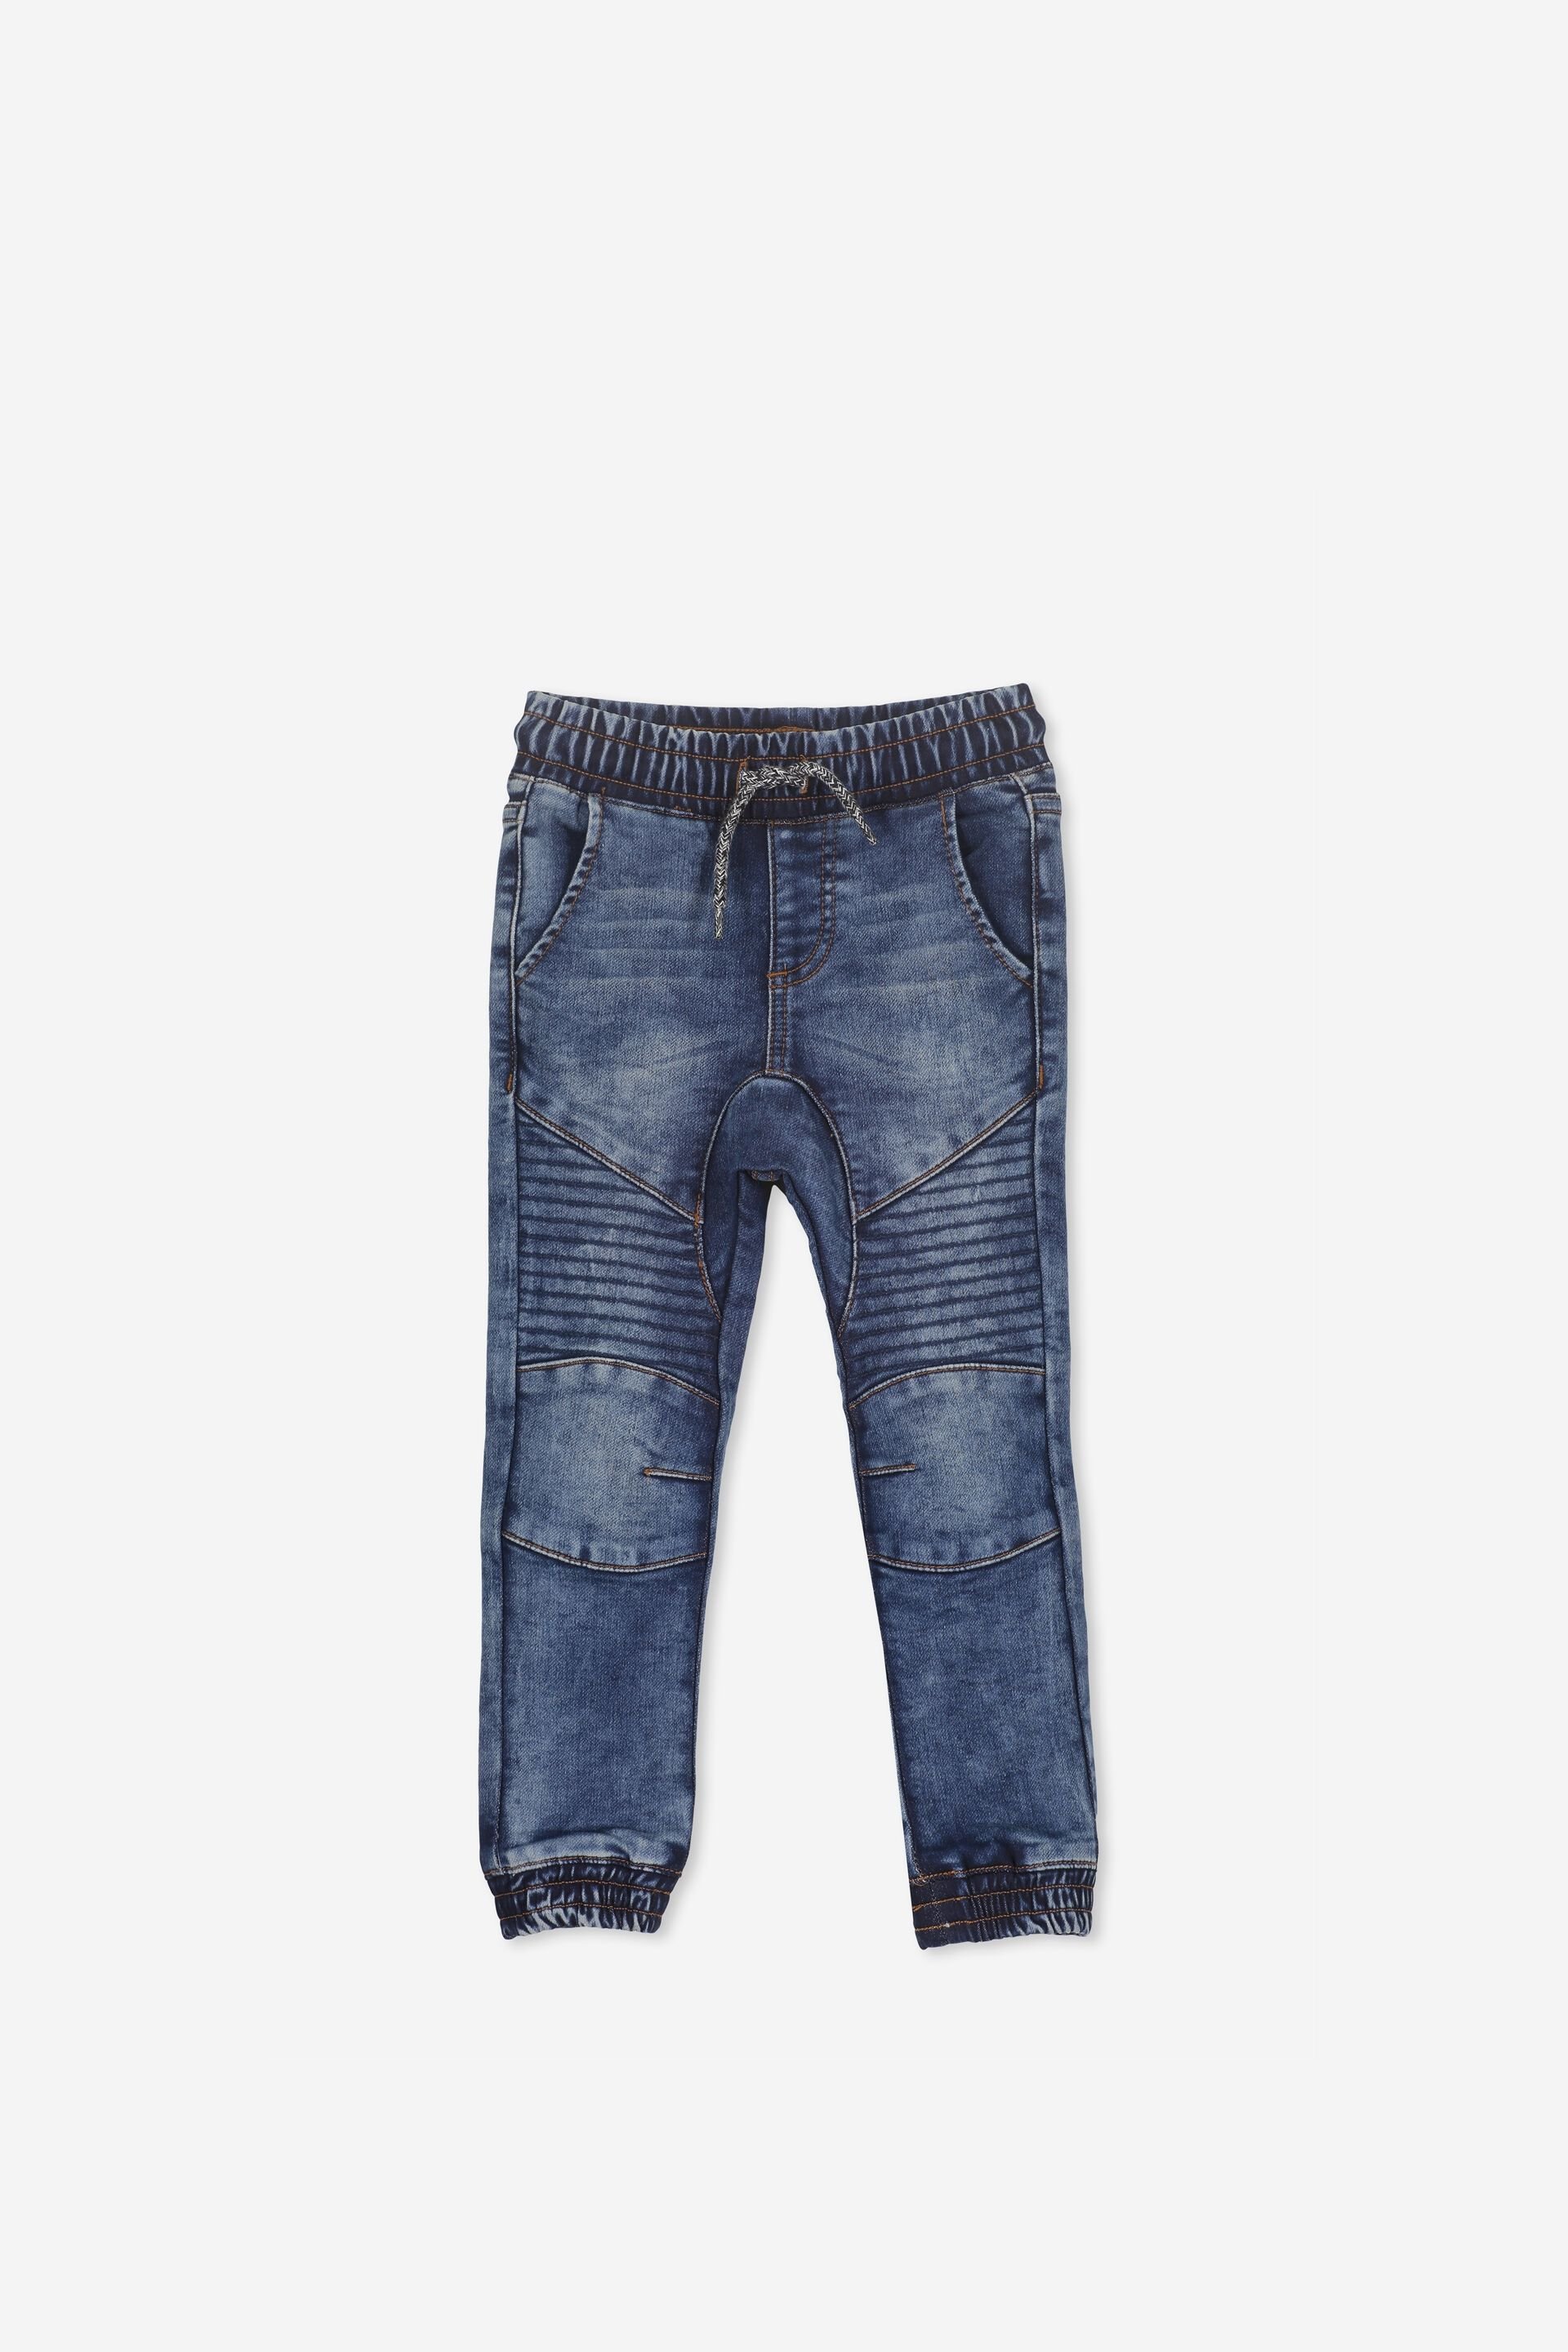 jogger jeans cotton on